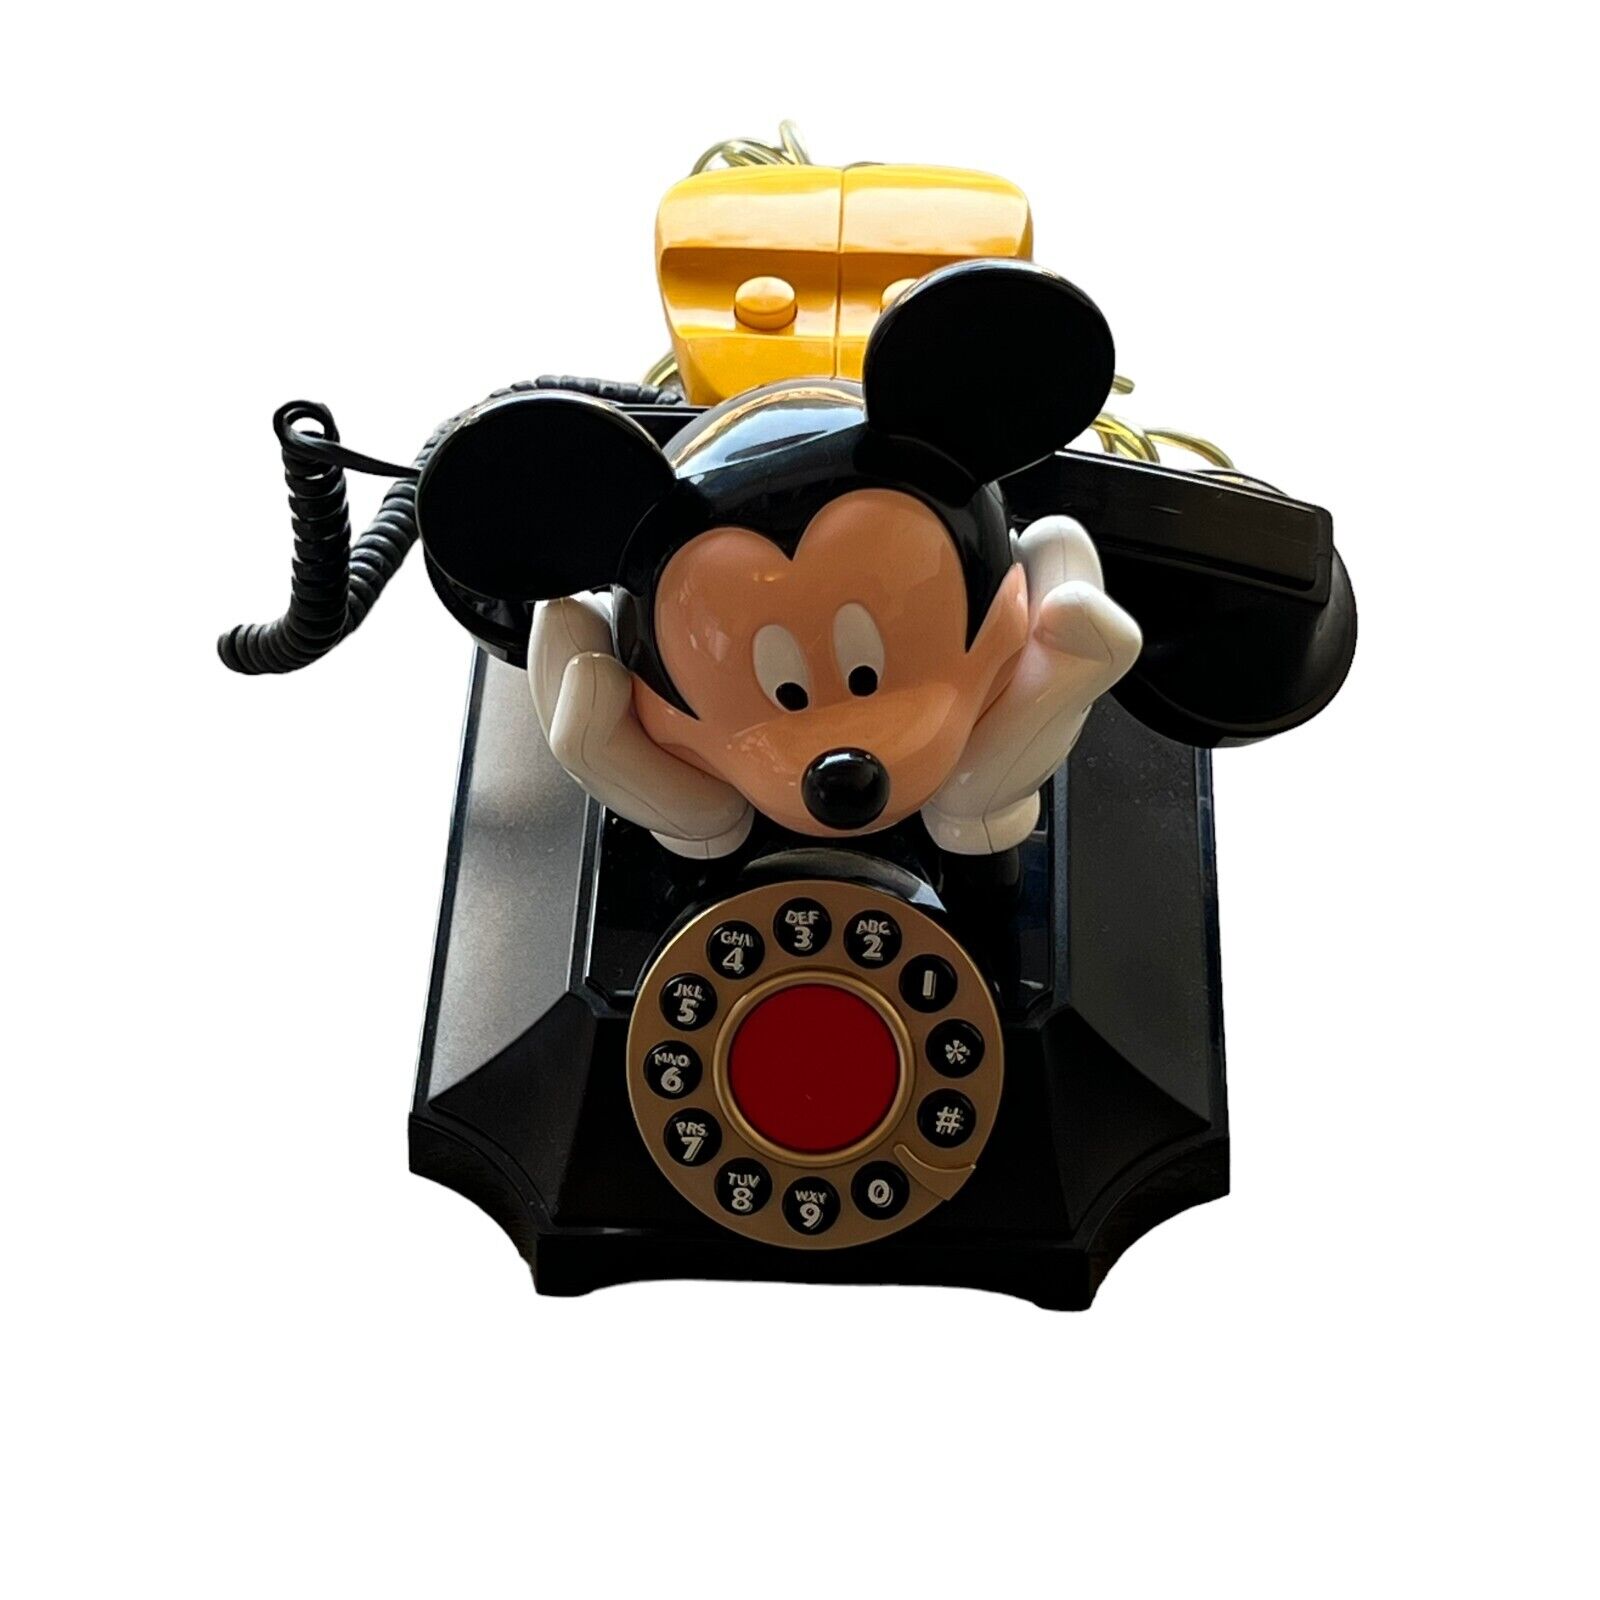 Vintage Telemania Mickey Mouse Rotary Telephone